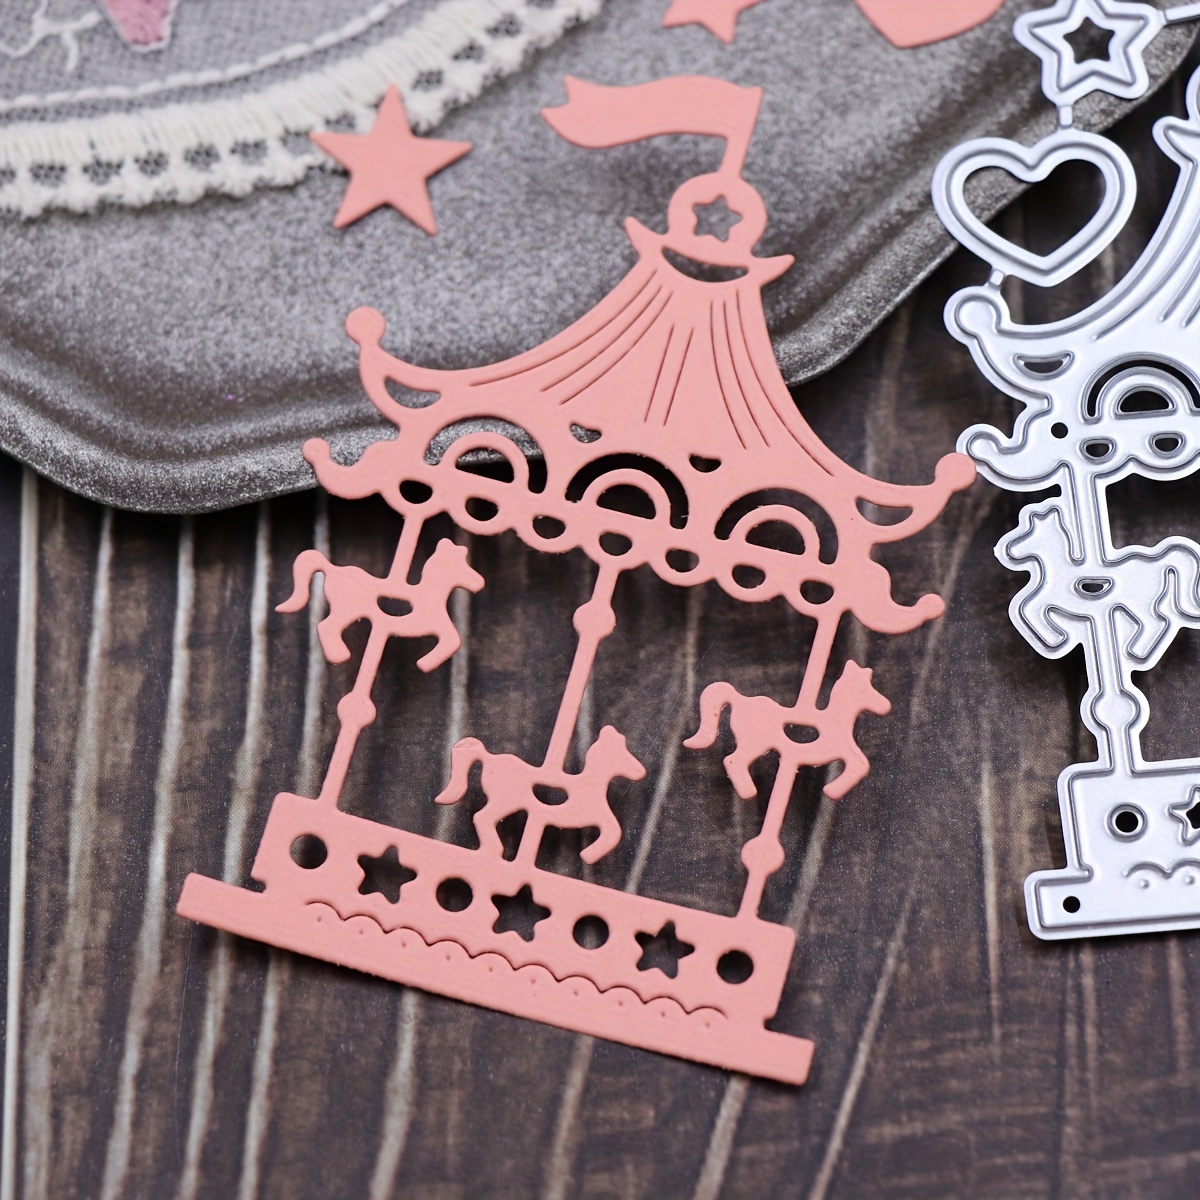 

1pc Cute Merry-go-round Metal Cutting Die For Scrapbooking, Diy Handmade Crafts Card-making Punching Embossing Stencil